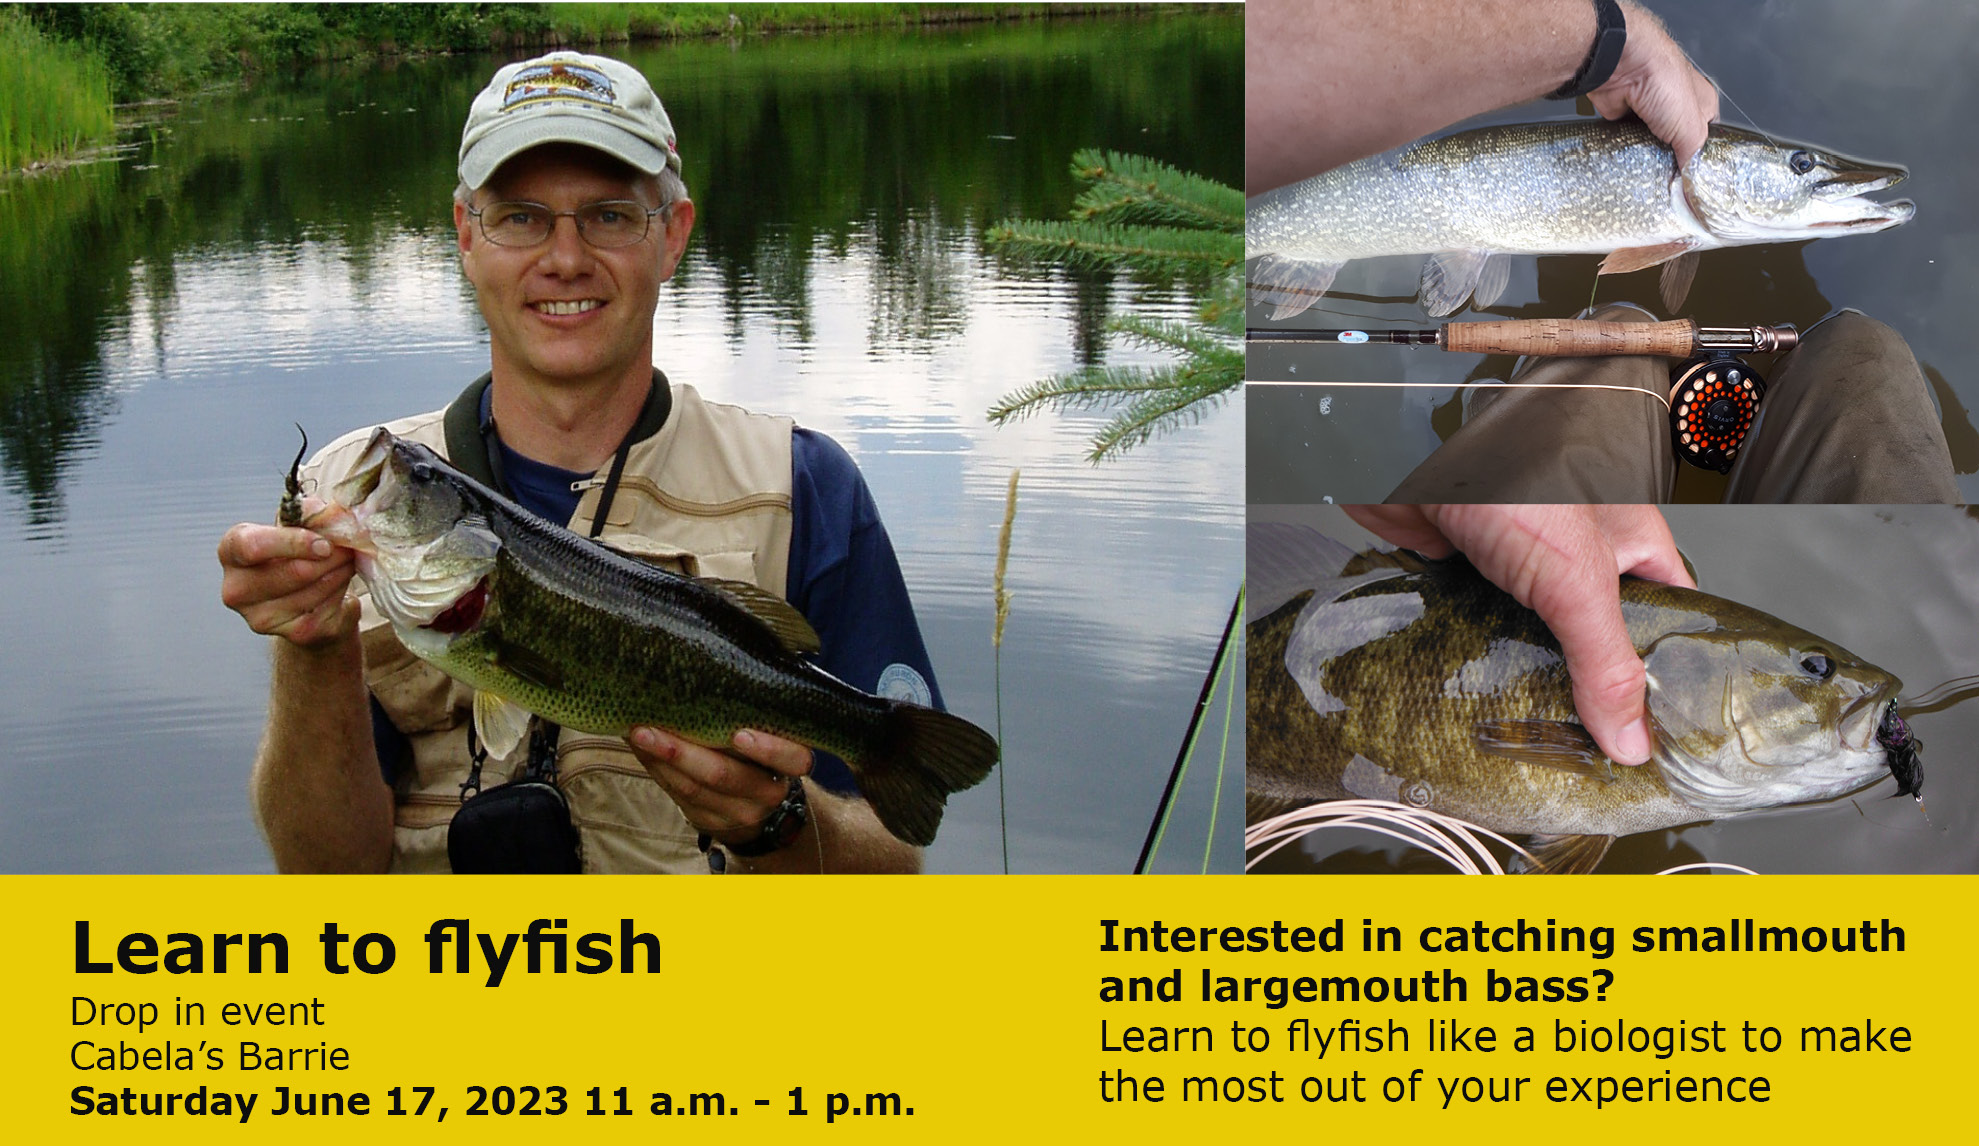 NVCA's fisheries biologist Fred Dobbs and Cabela's Barrie will be hosting a flyfishing workshop! ﻿ Both smallmouth and largemouth bass are both exciting to catch while flyfishing! To be successful with these species, however, requires different gear, flies and techniques than fly fishing for trout. ﻿ Come join us on Saturday, June 17 to learn how to fly fish for bass to make sure you have the best ever summer season on the water!